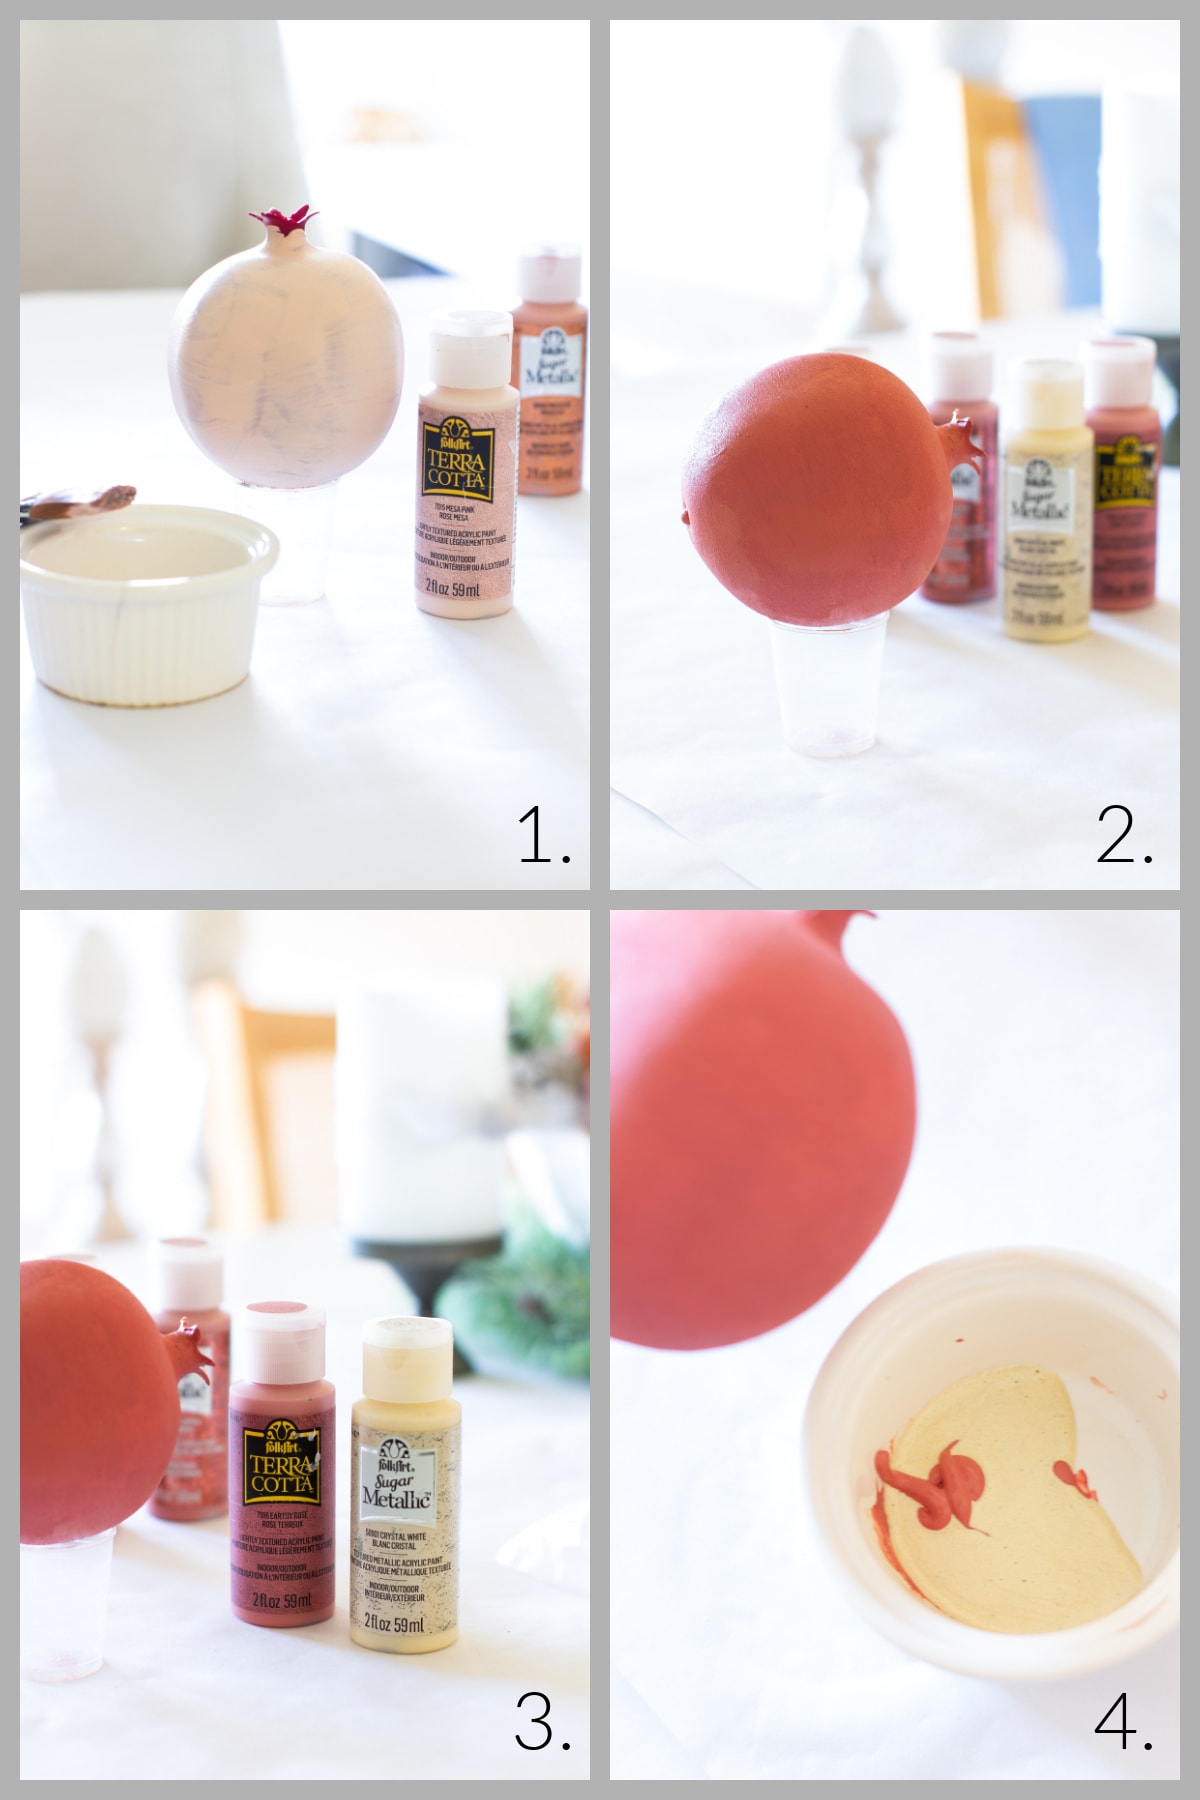 step by step image instructions for faux sugared fruits diy